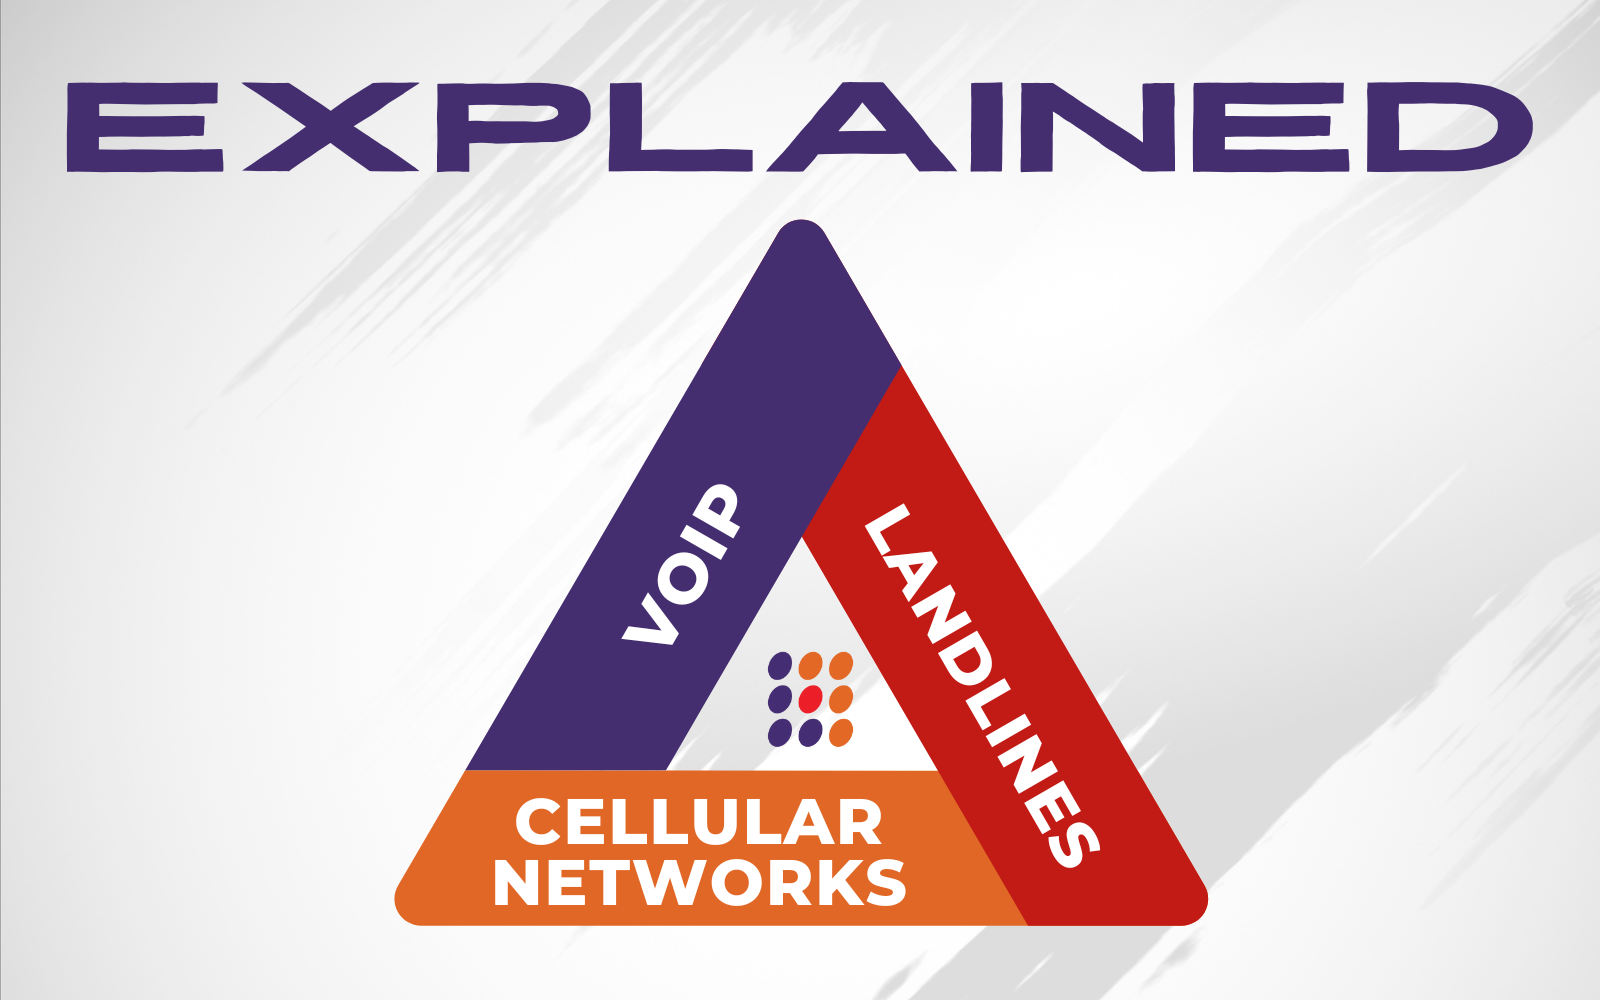 VoIP over cellular data networks